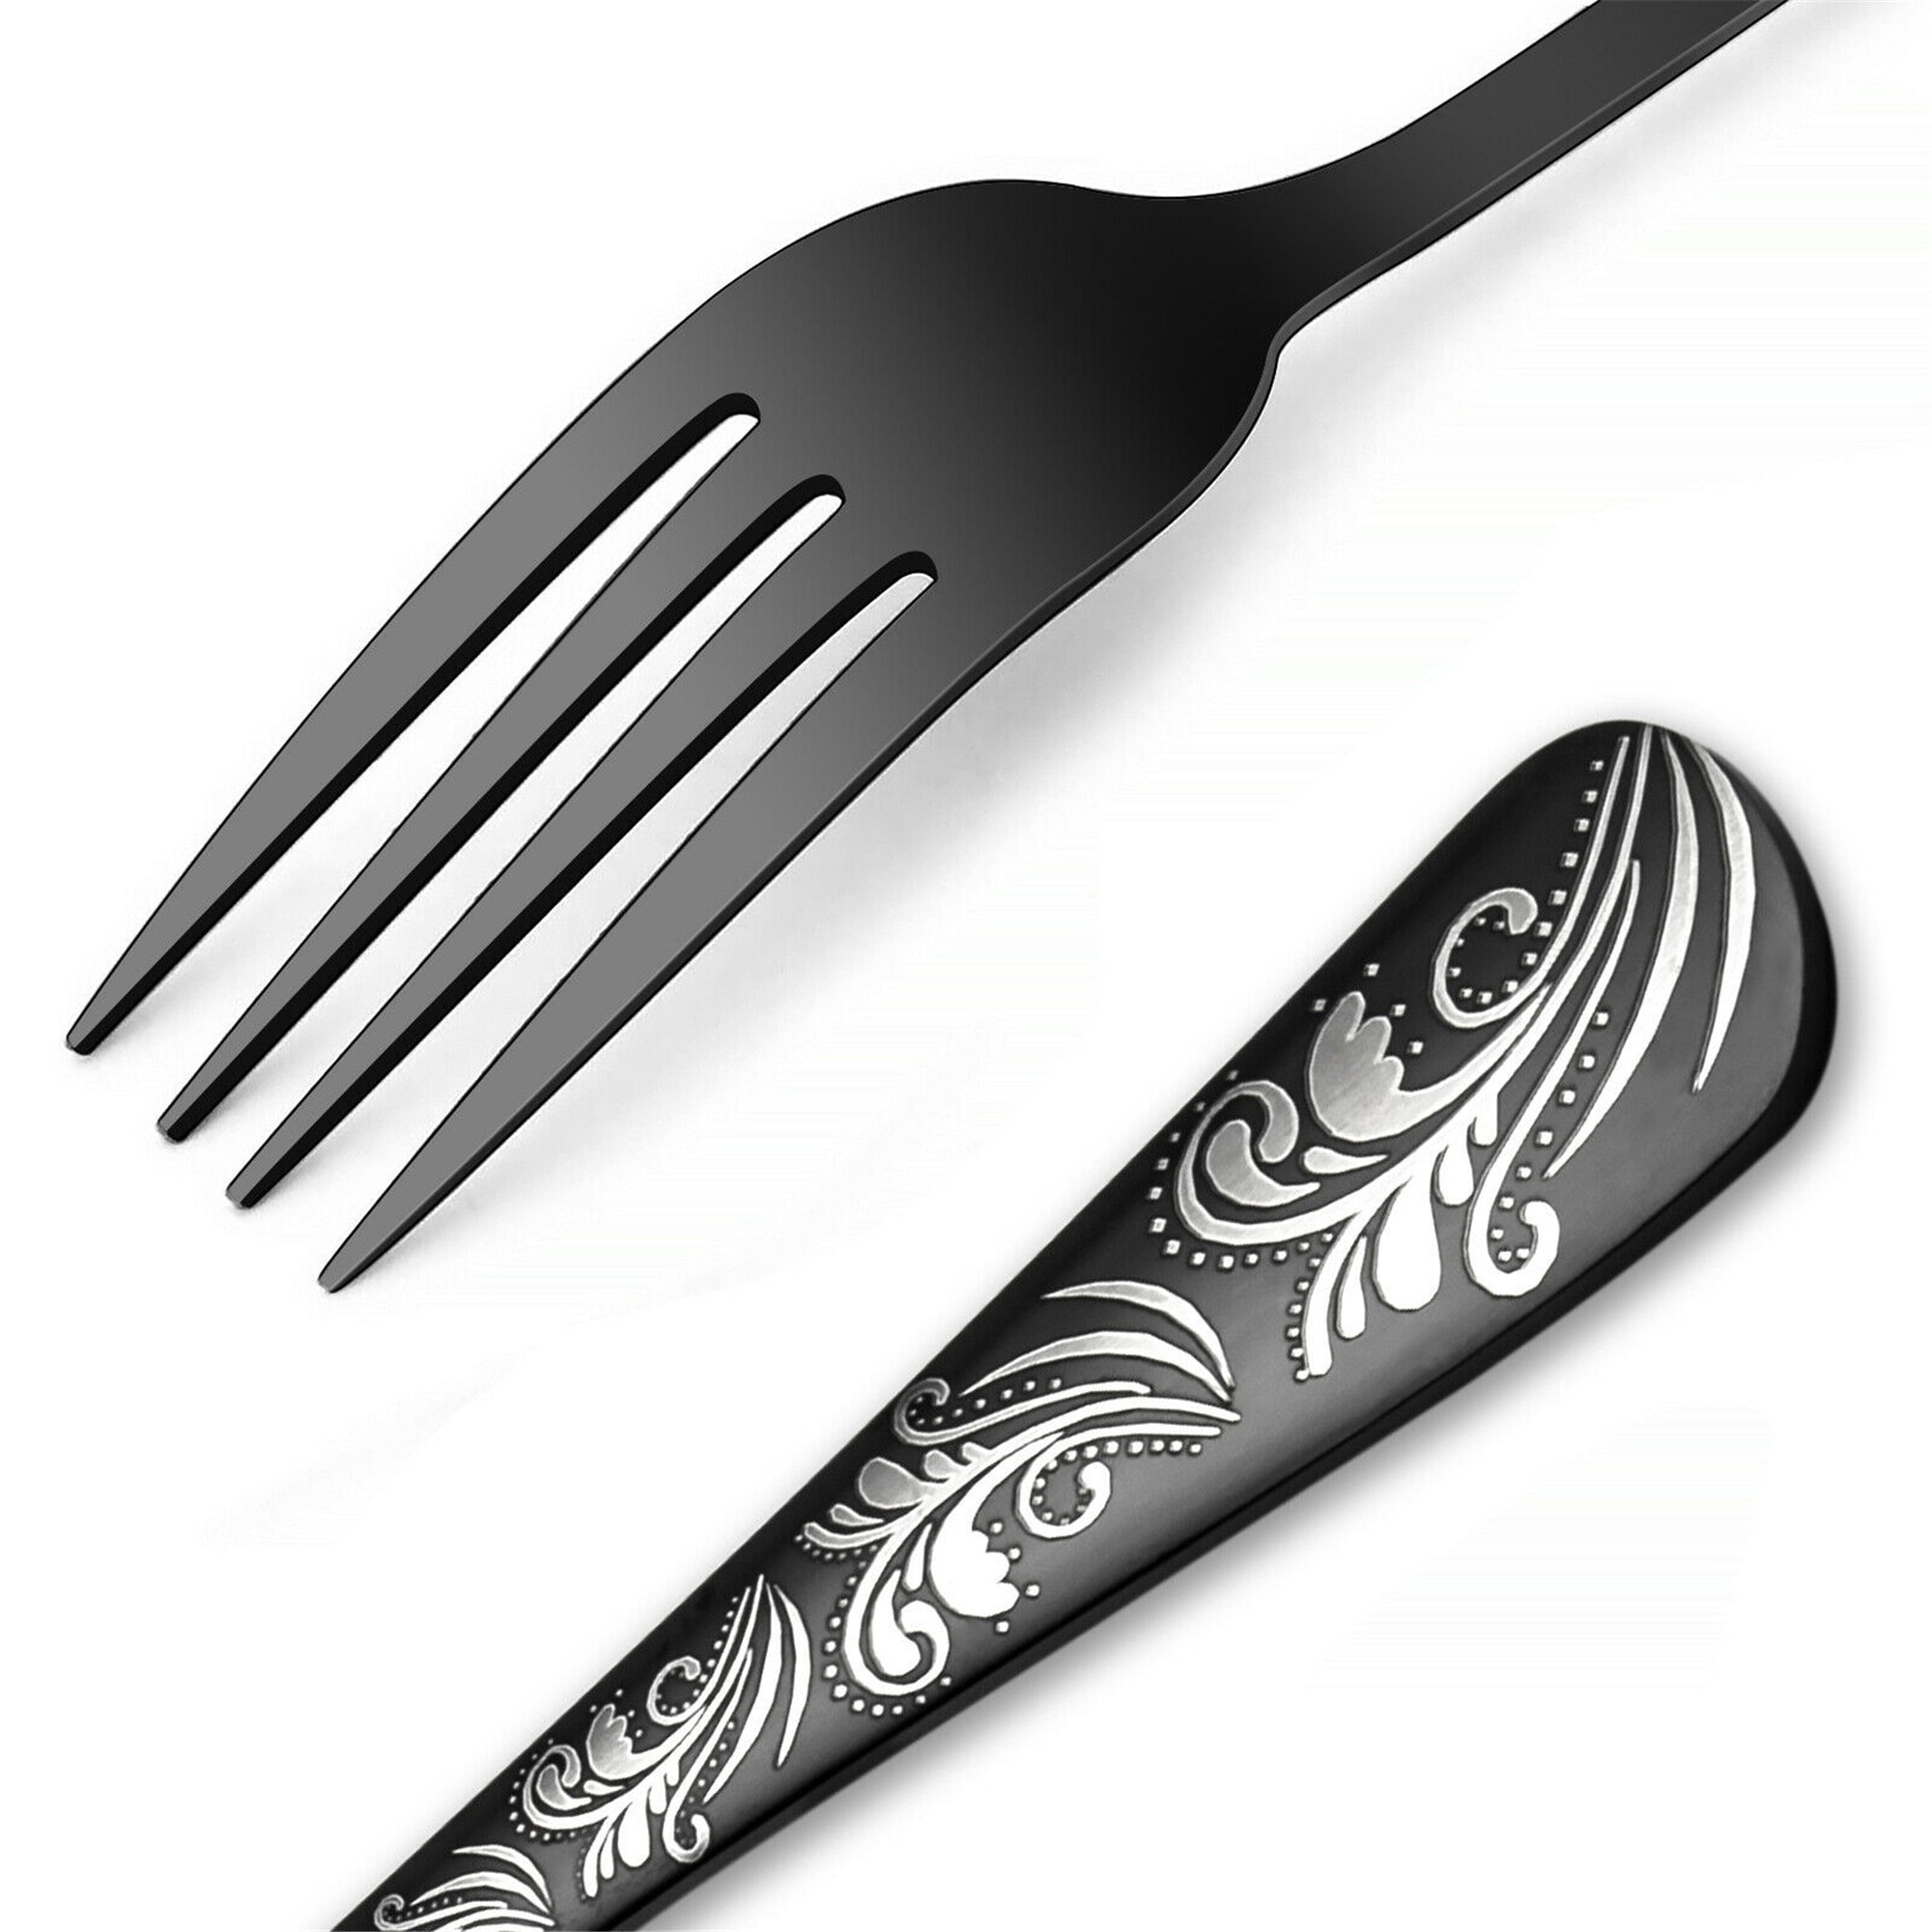 https://ak1.ostkcdn.com/images/products/is/images/direct/81af1bc566b672f791df6a1d3cdf16cb86a7b1b1/45Pcs-20Pcs-Black-Flatware-Set-Stainless-Steel-Silverware-Cutlery-Set-Service-For-8-Machine-wash-safe.jpg